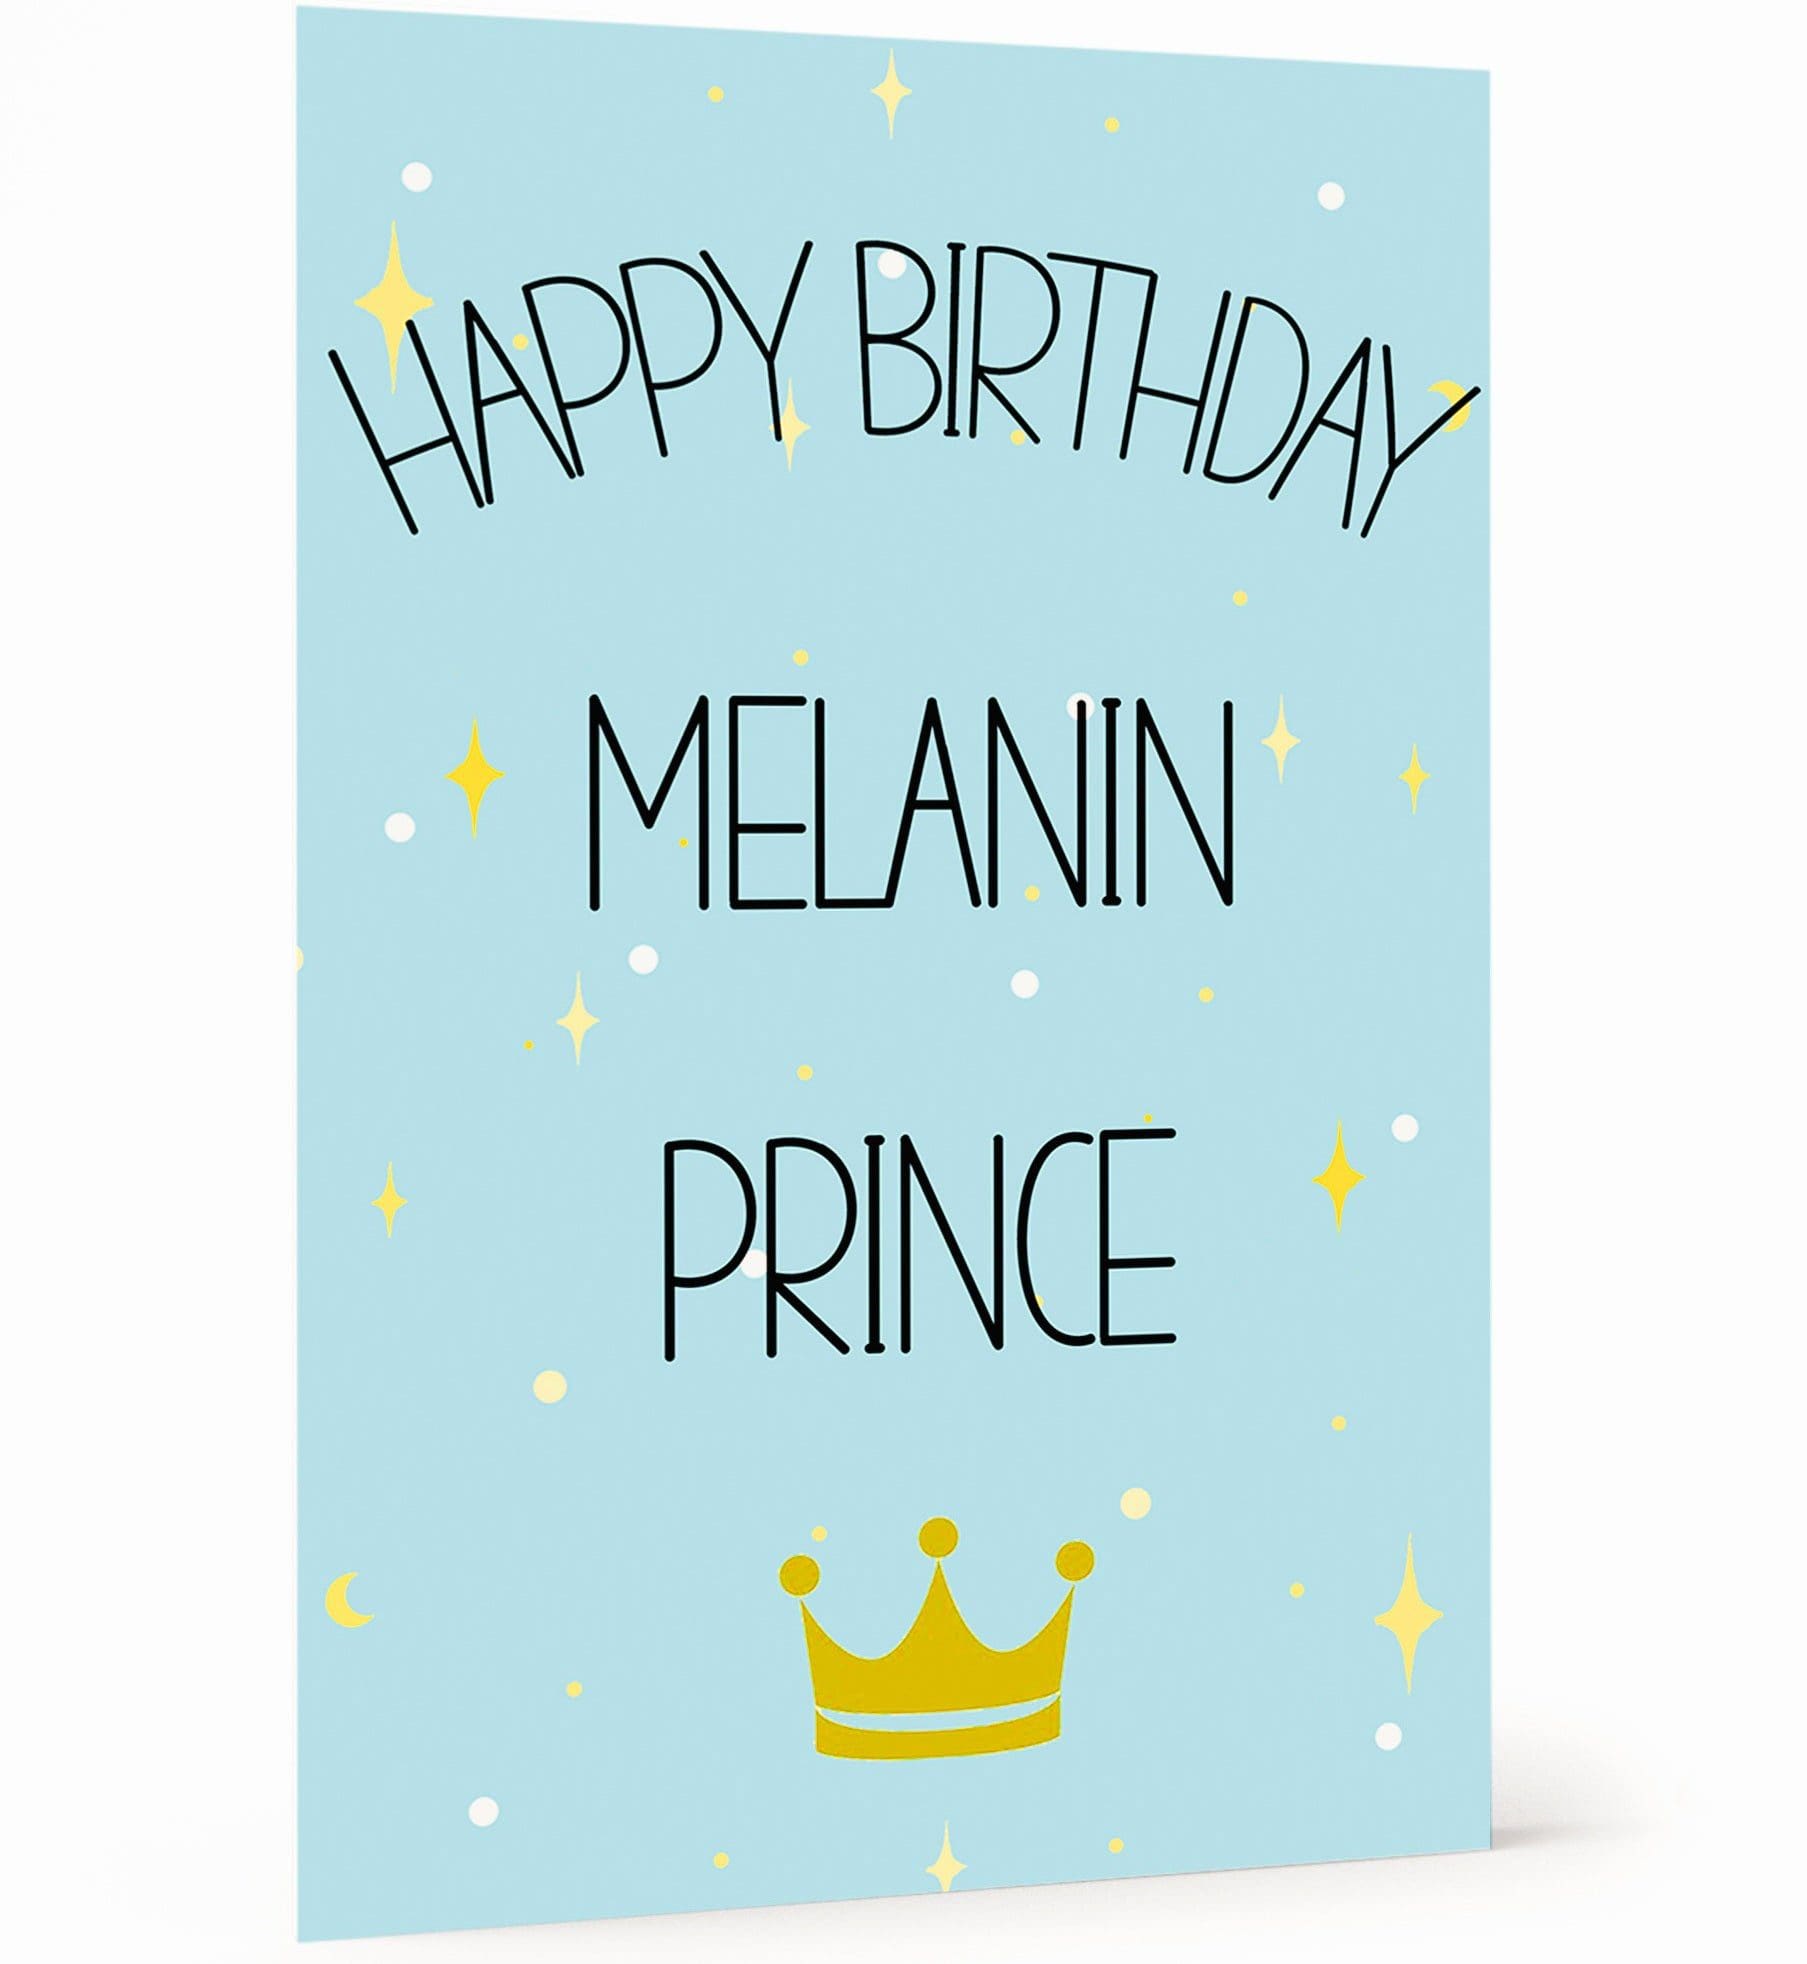 Melanin Prince Card, wakuda, african print fans, black-owned brands, black pound day